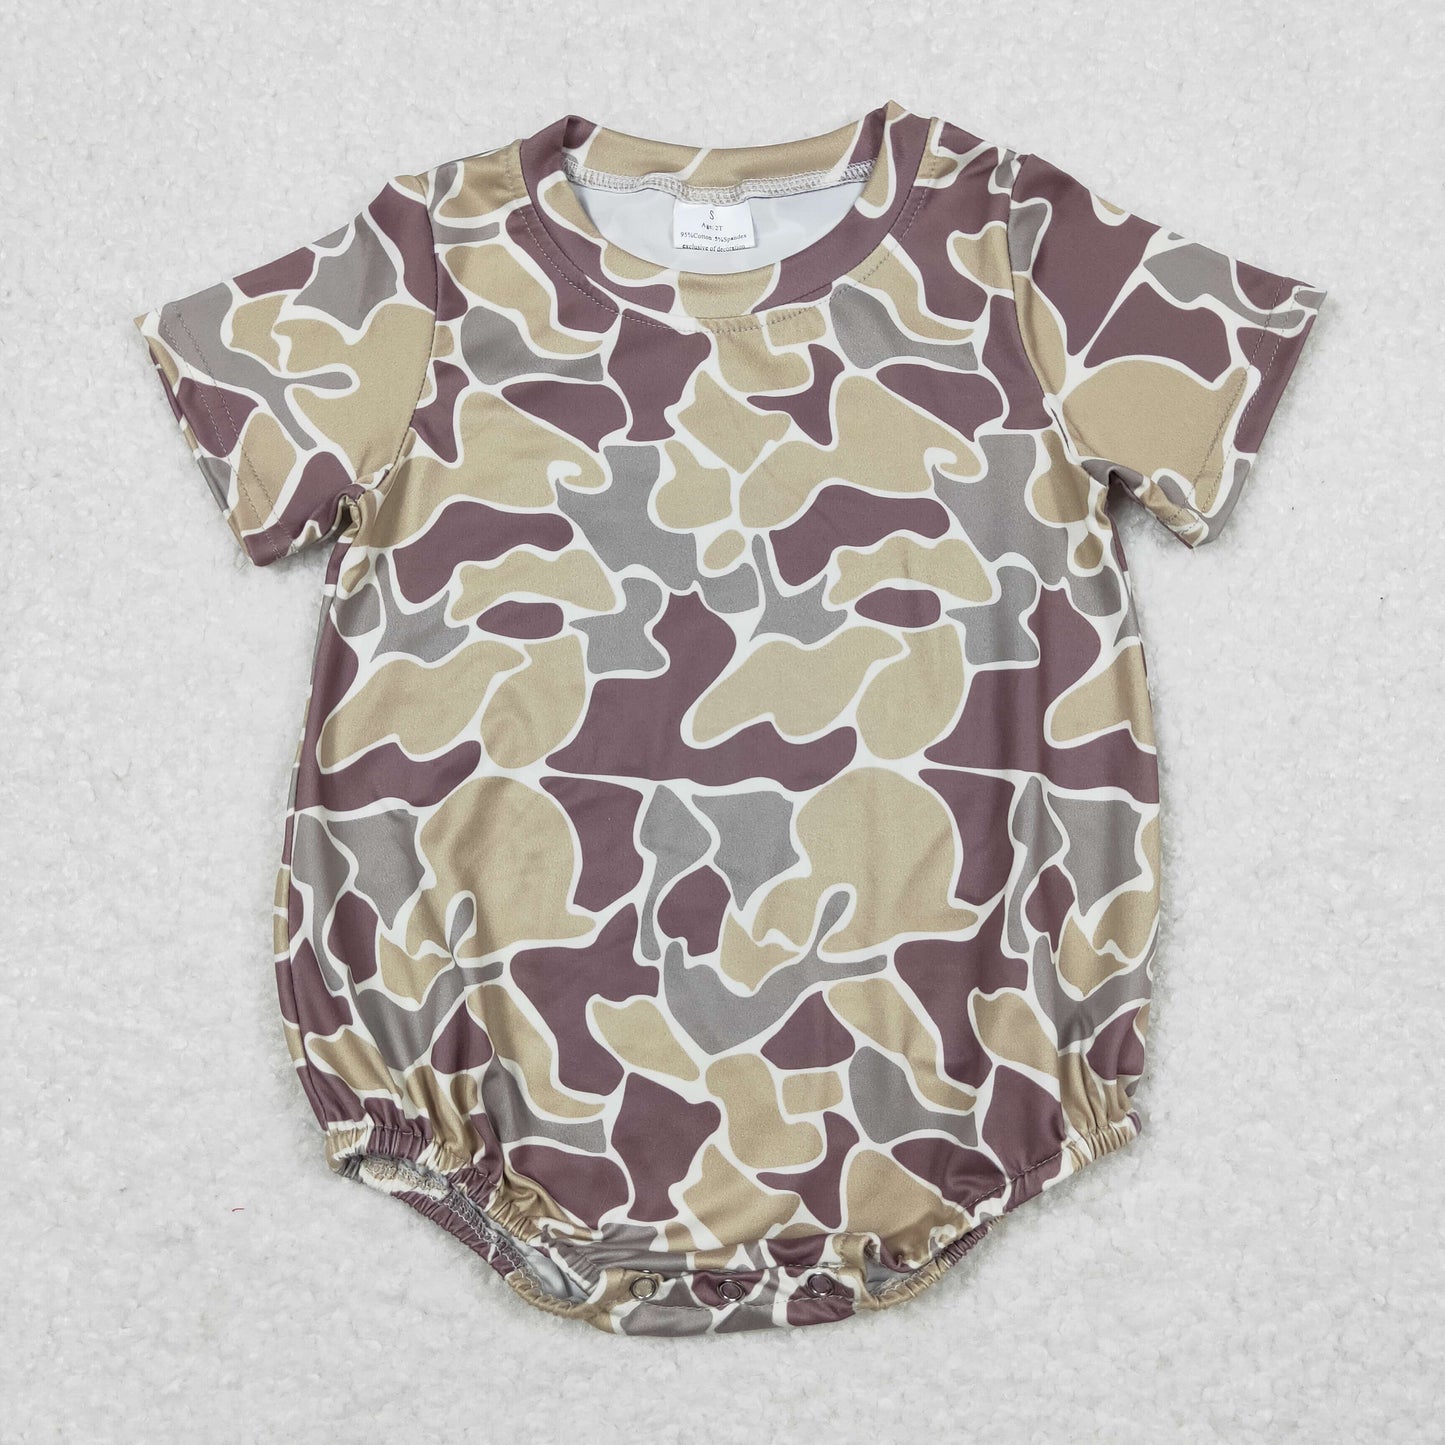 SR1252 Camouflage brown and green short-sleeved jumpsuit